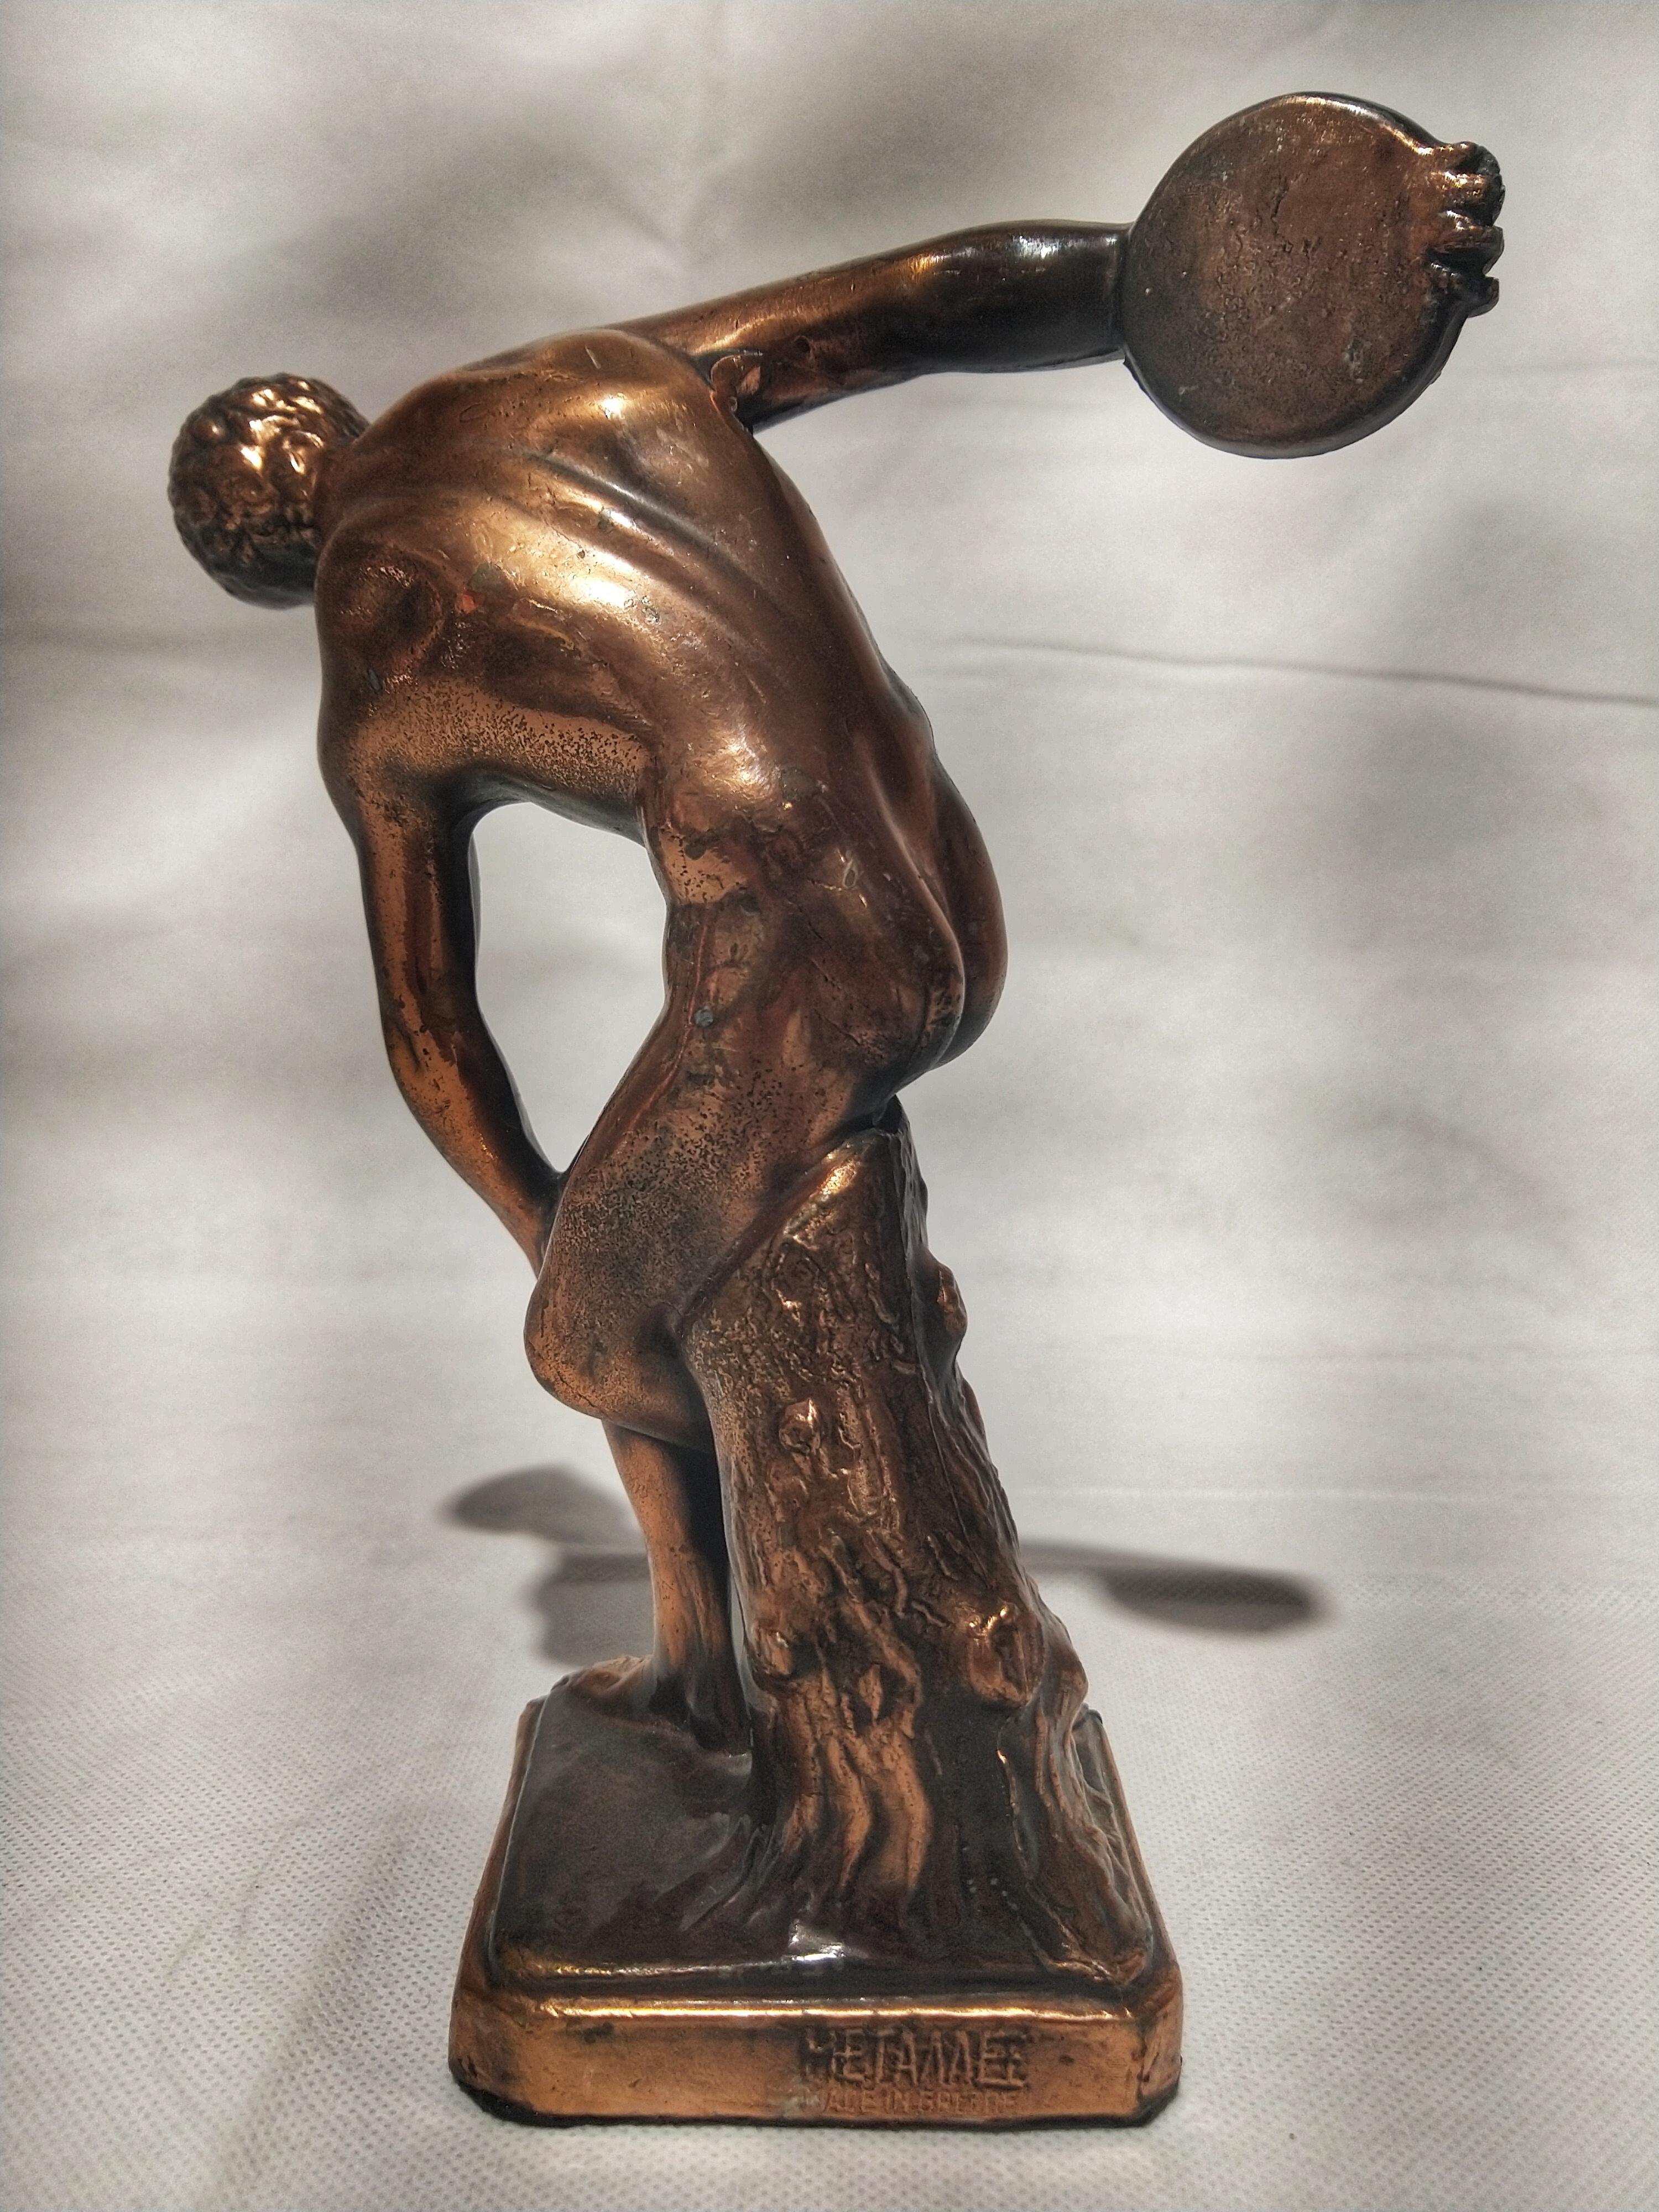 Art Deco bronze figure, reproduction of the famous sculpture.

The Discobolus of Myron is a Greek sculpture completed at the start of the Classical Period, figuring a youthful ancient Greek athlete throwing discus, circa 460–450 BC. The original